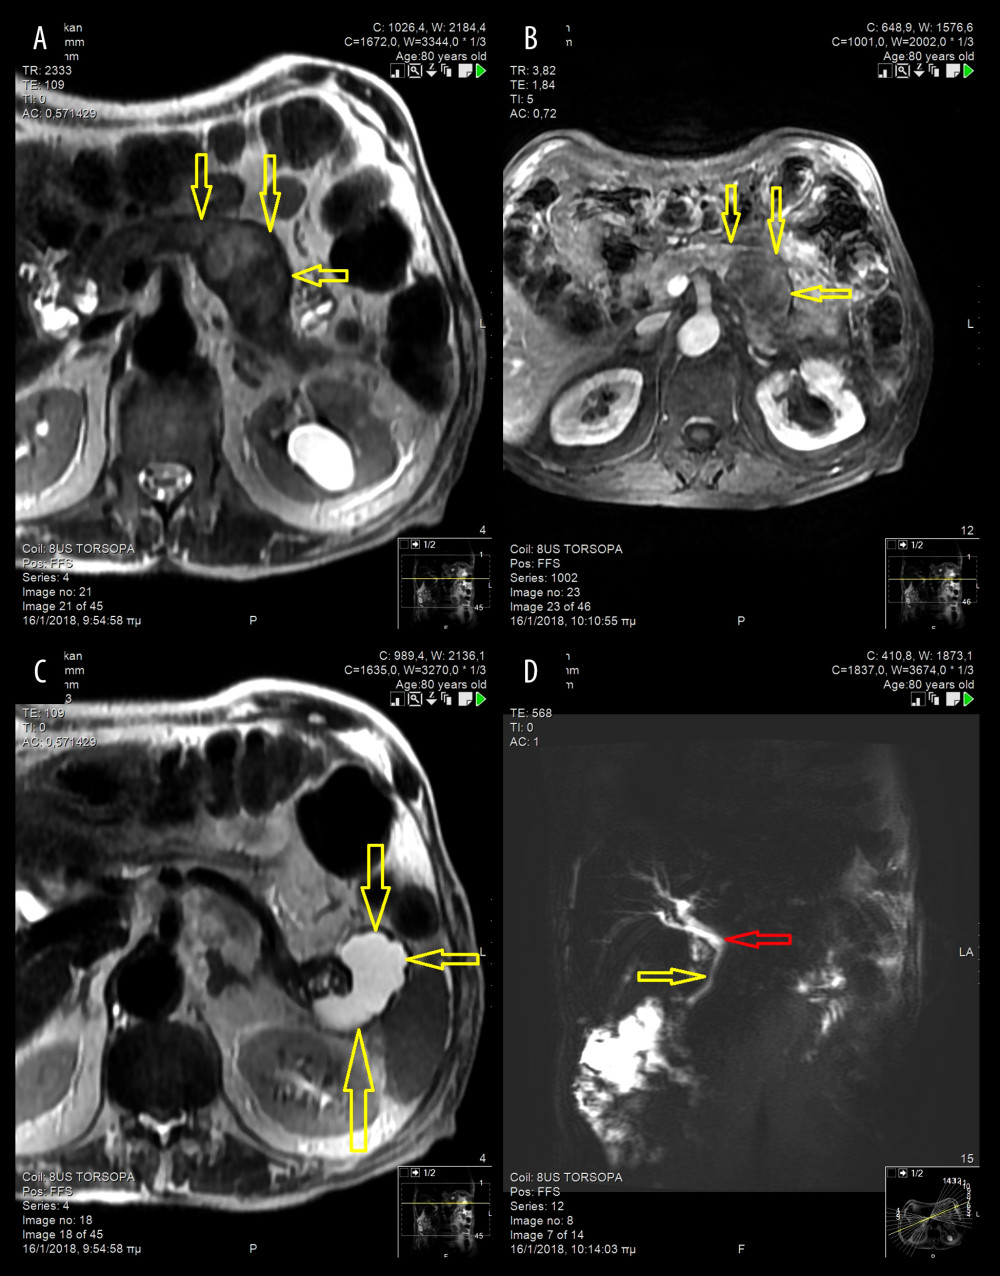 Diffuse cystic dilation at the pancreatic body and tail with severe parenchymal heterogeneity shown in (A) T2W2 abdominal MRI (arrows), and (B) vibe post contrast abdominal MRI (arrows). (C) T2-weighed abdominal MRI: cystic lesion with compact elements and high signal intensity in contact with the tail of the pancreas and the hilum of the spleen (arrows). (D) MRCP: mild dilation of the common hepatic duct (red arrow) with smooth stenosis of the common bile duct (yellow arrow). Absence of visualization of the major or accessory pancreatic duct. MRI – magnetic resonance imagining; MRCP – magnetic resonance cholangiopancreatography.